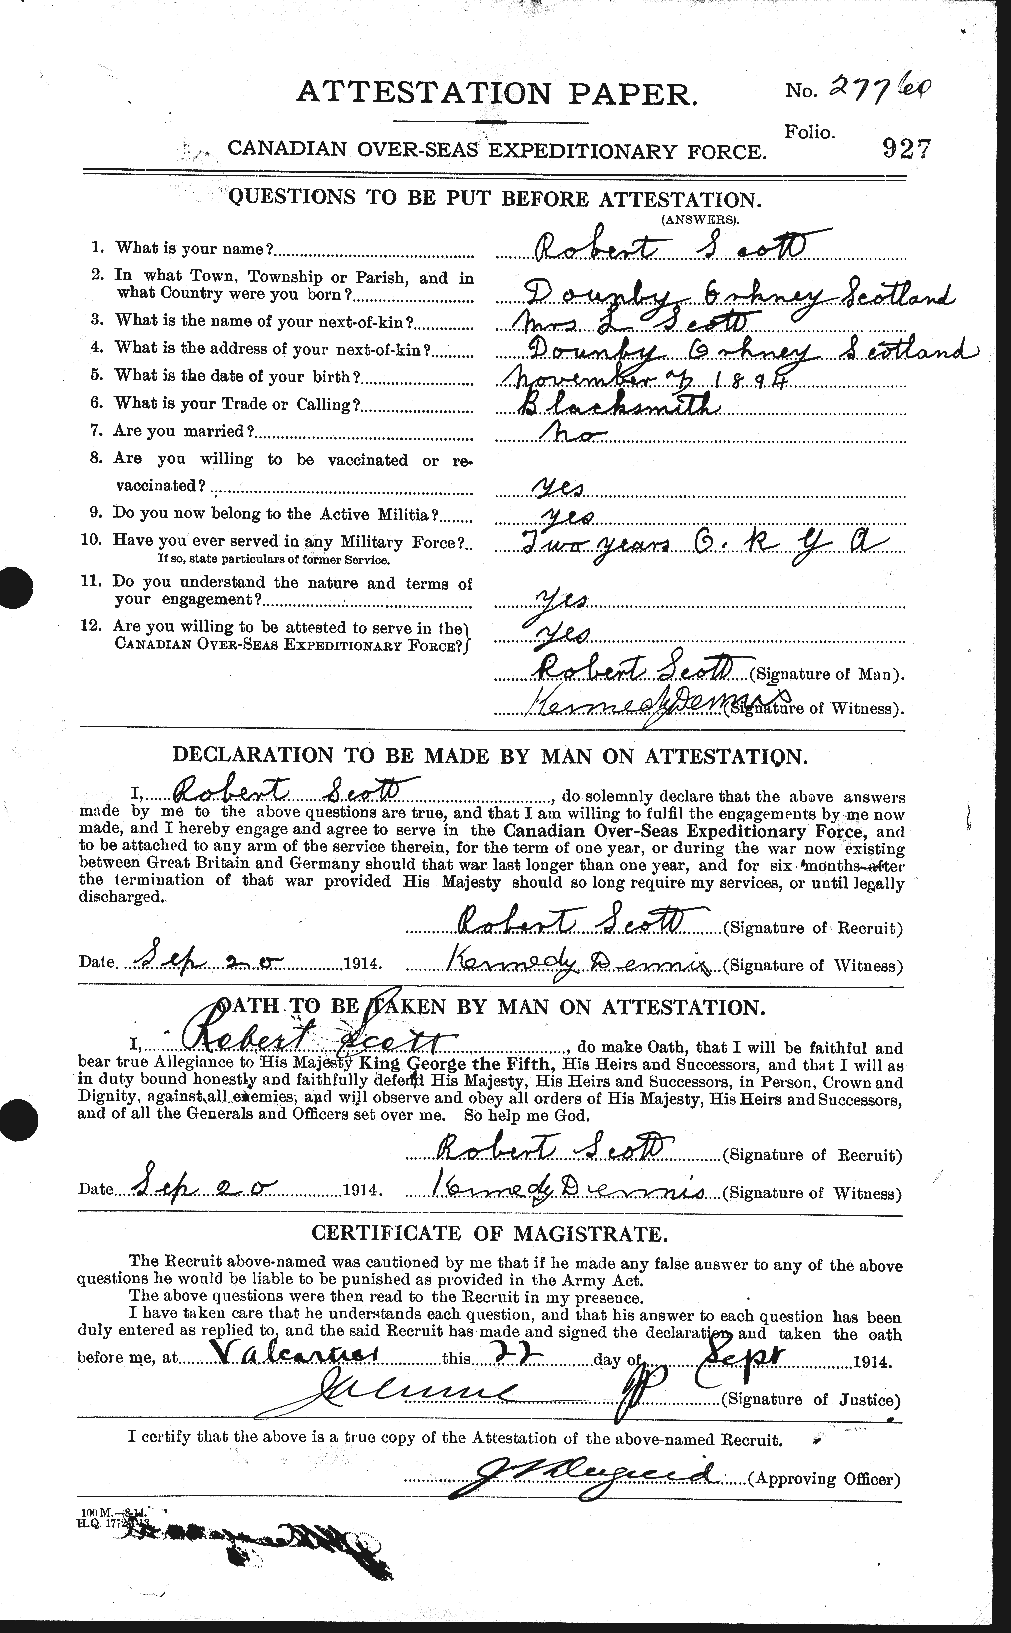 Personnel Records of the First World War - CEF 089253a